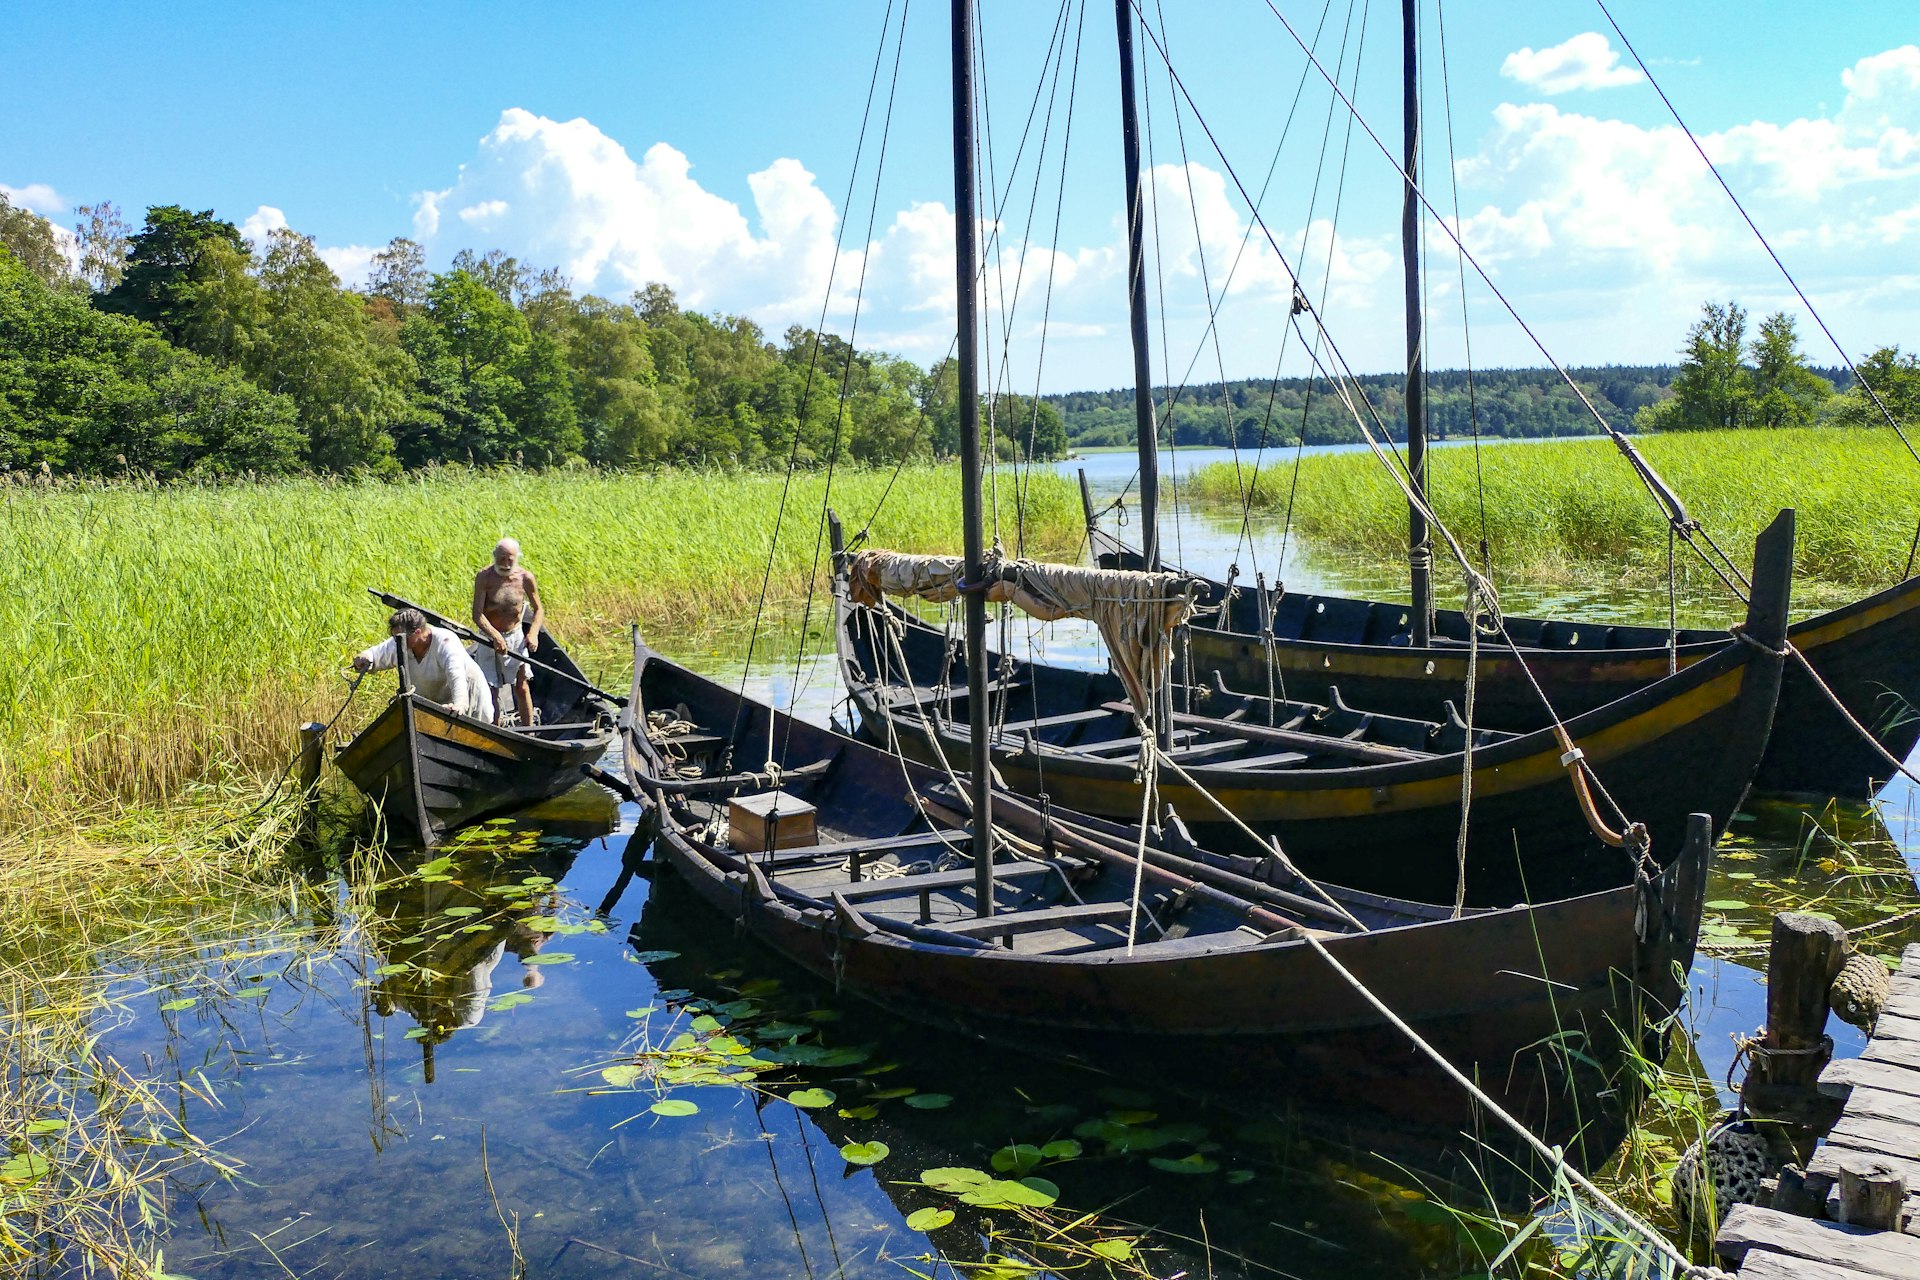 Wooden Viking longships moored together in a small harbor on the edge of peaceful water filled with reeds